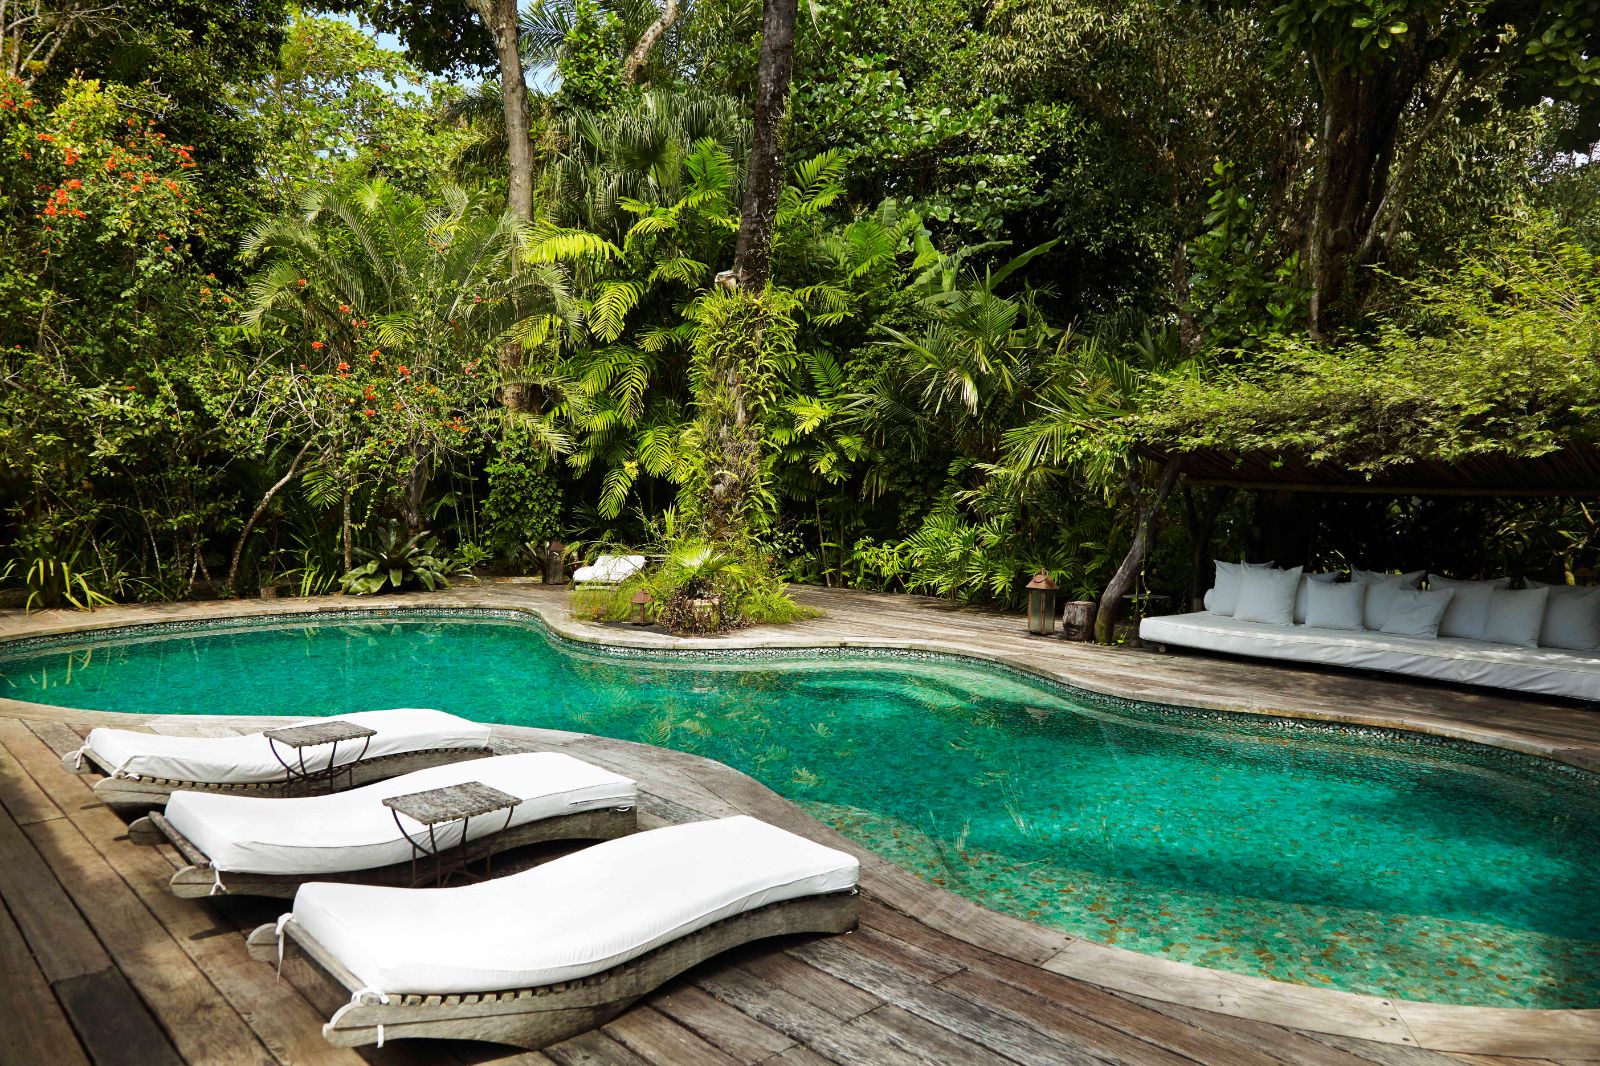 Serene outdoor pool with luxury sunbeds surrounded by tall trees and bushes at luxury resort Uxua Casa Hotel and Spa in Brazil